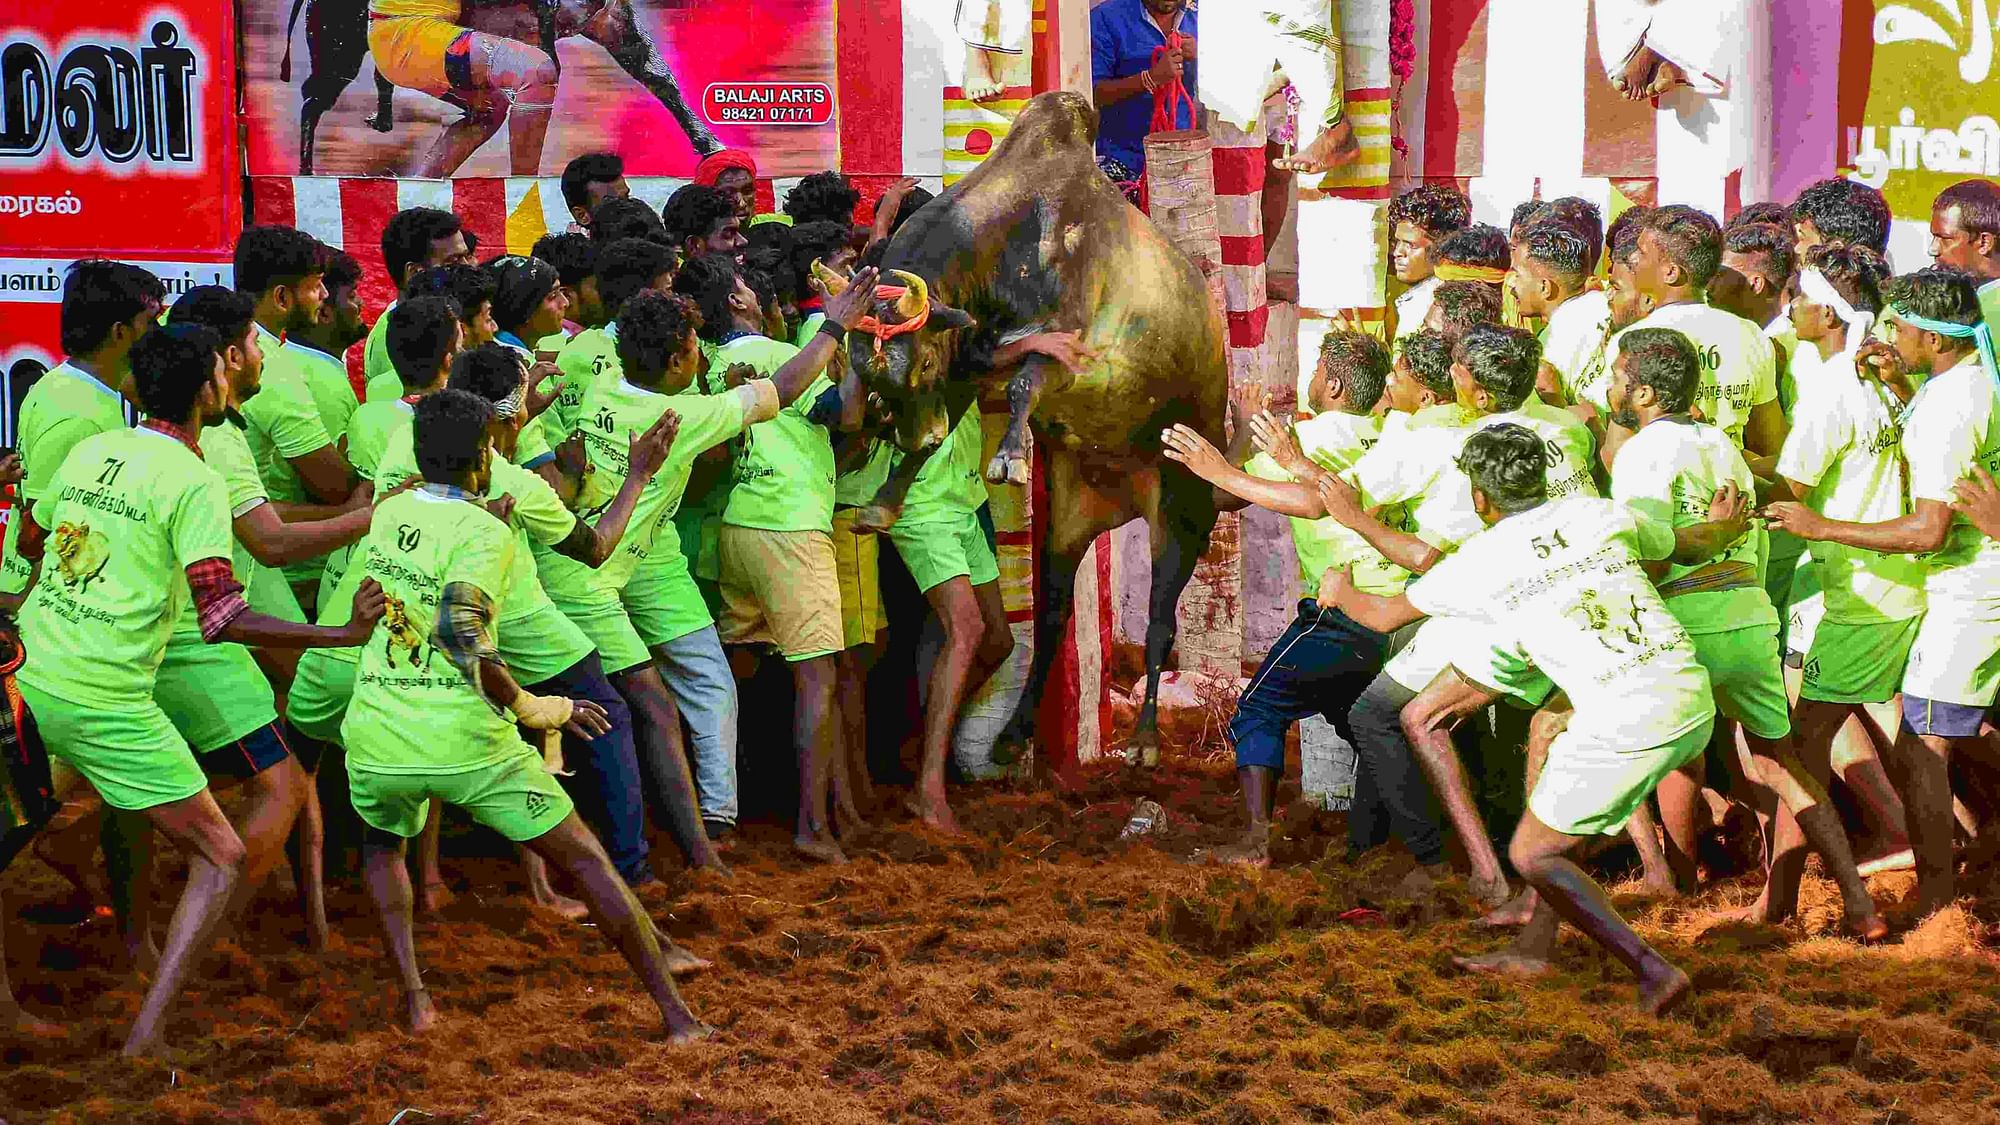 The Tamil Nadu state government has allowed Jallikattu to be held in the state adhering to a set of standard operating procedures to keep the spread of COVID-19 in check.